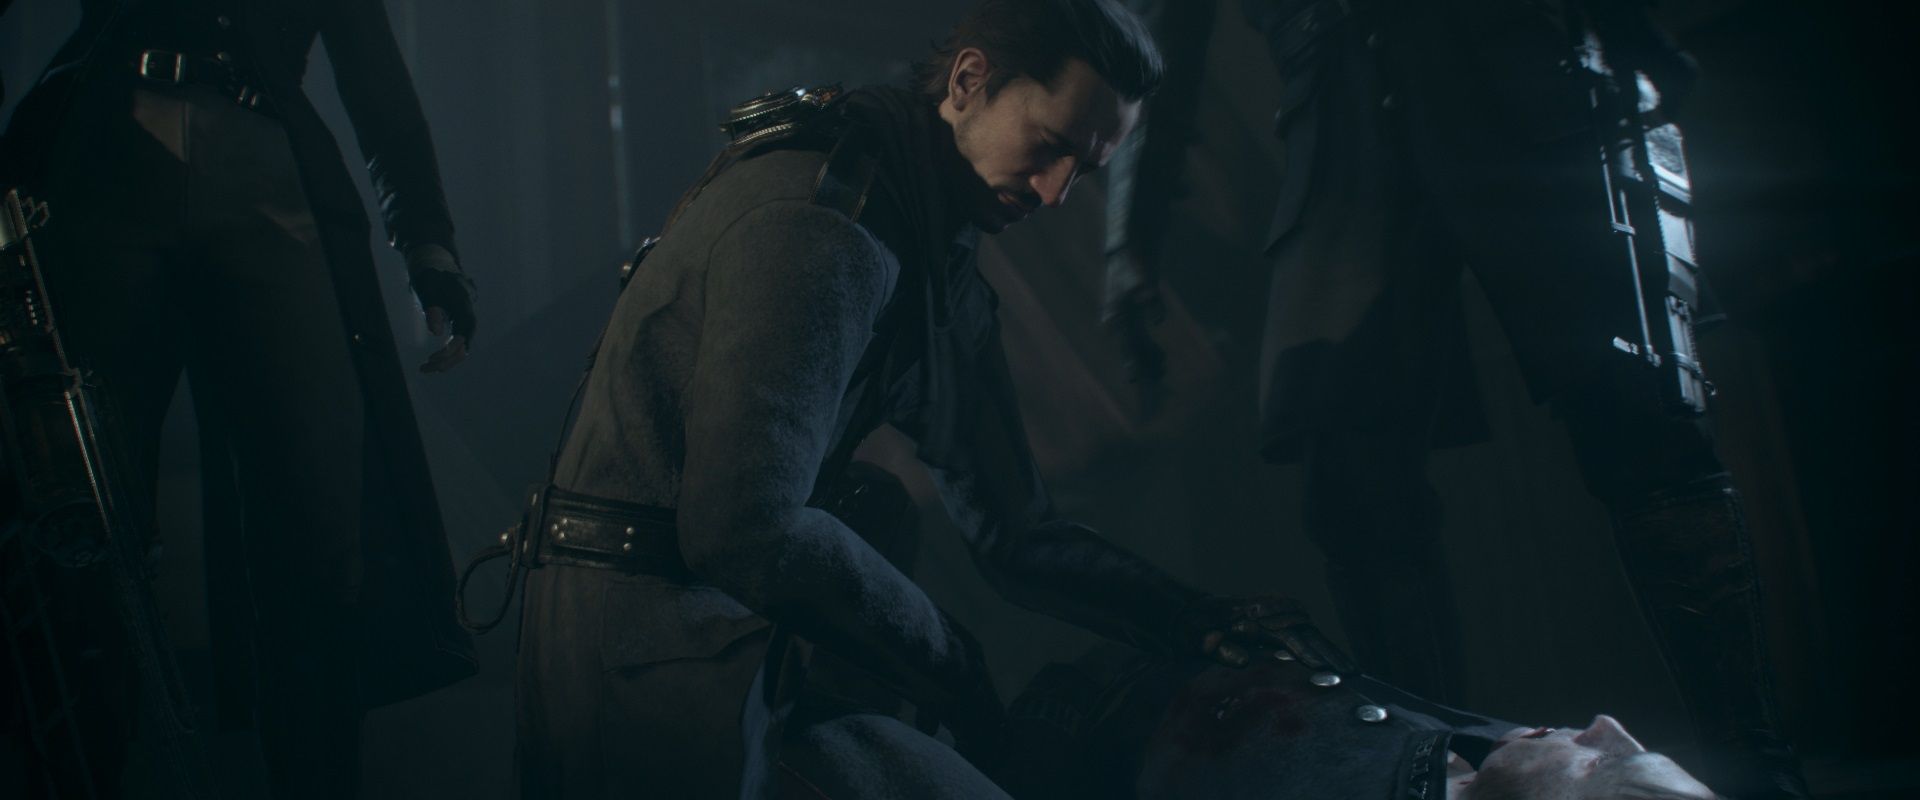 The Order 1886 - 4